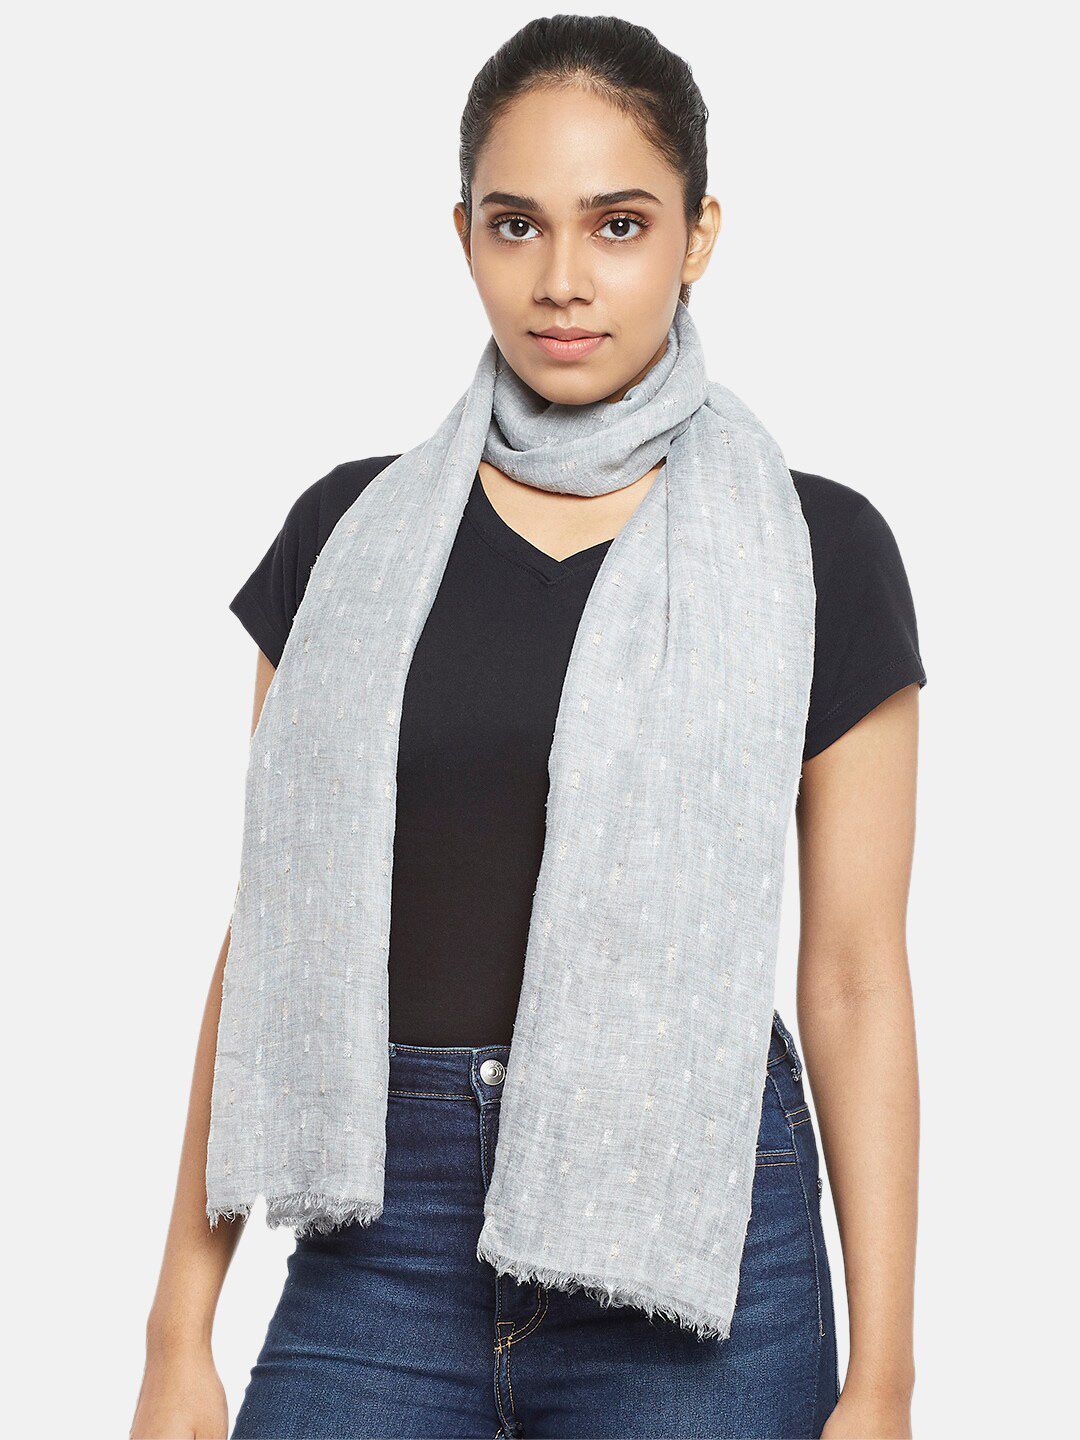 Honey by Pantaloons Women Grey & White Solid Viscose Scarf Price in India